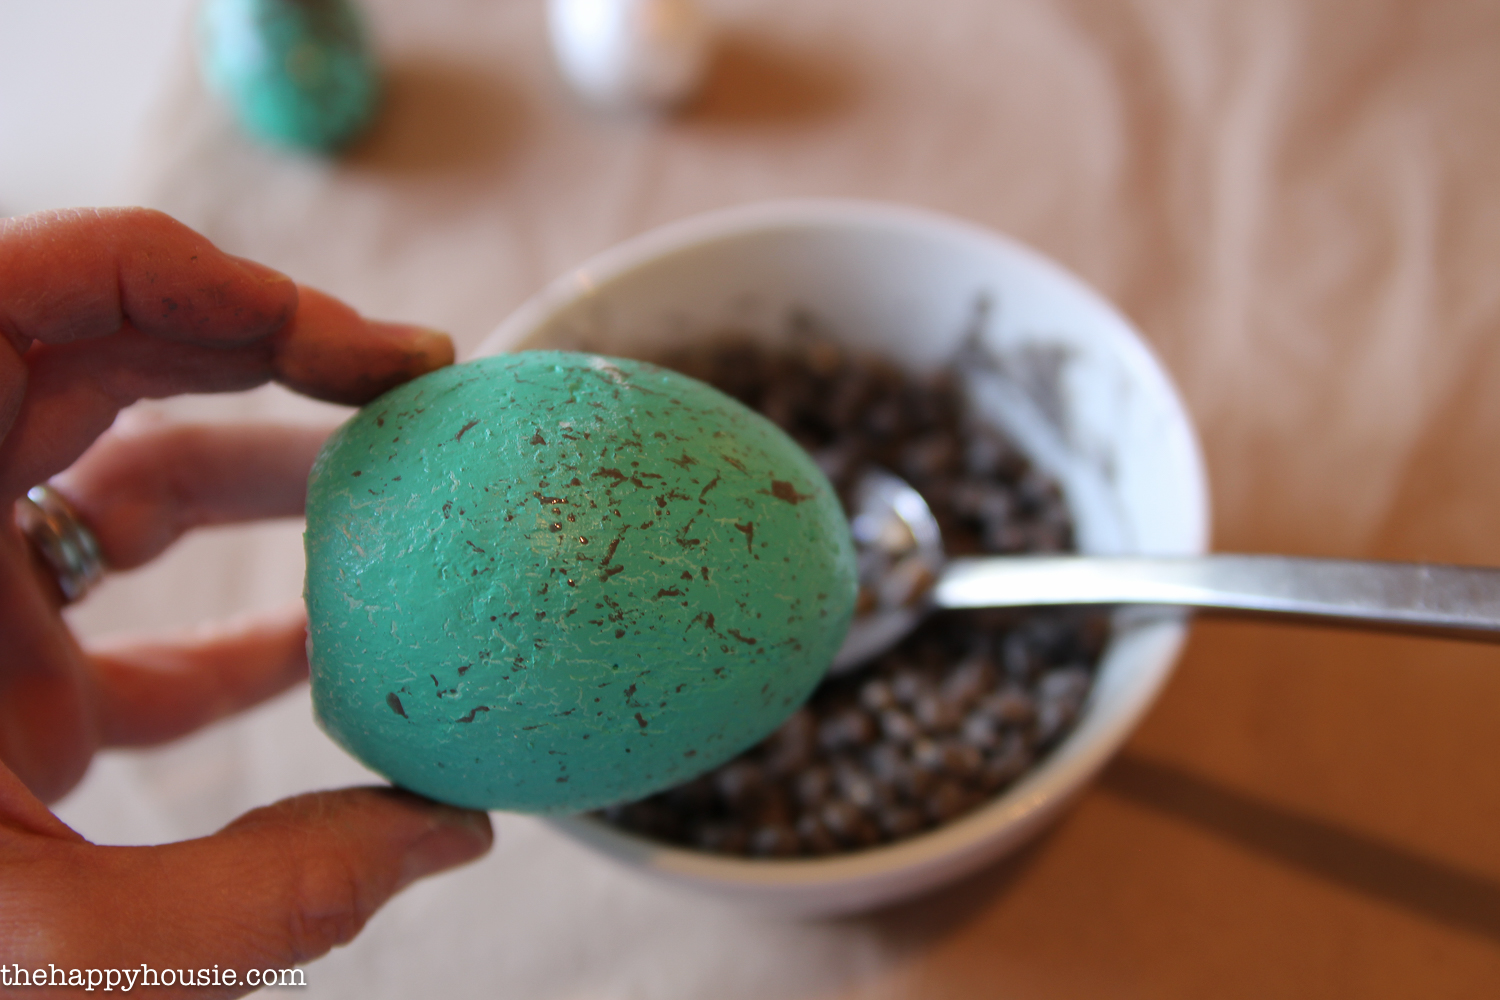 Using the popcorn seeds to spackle the Easter egg.